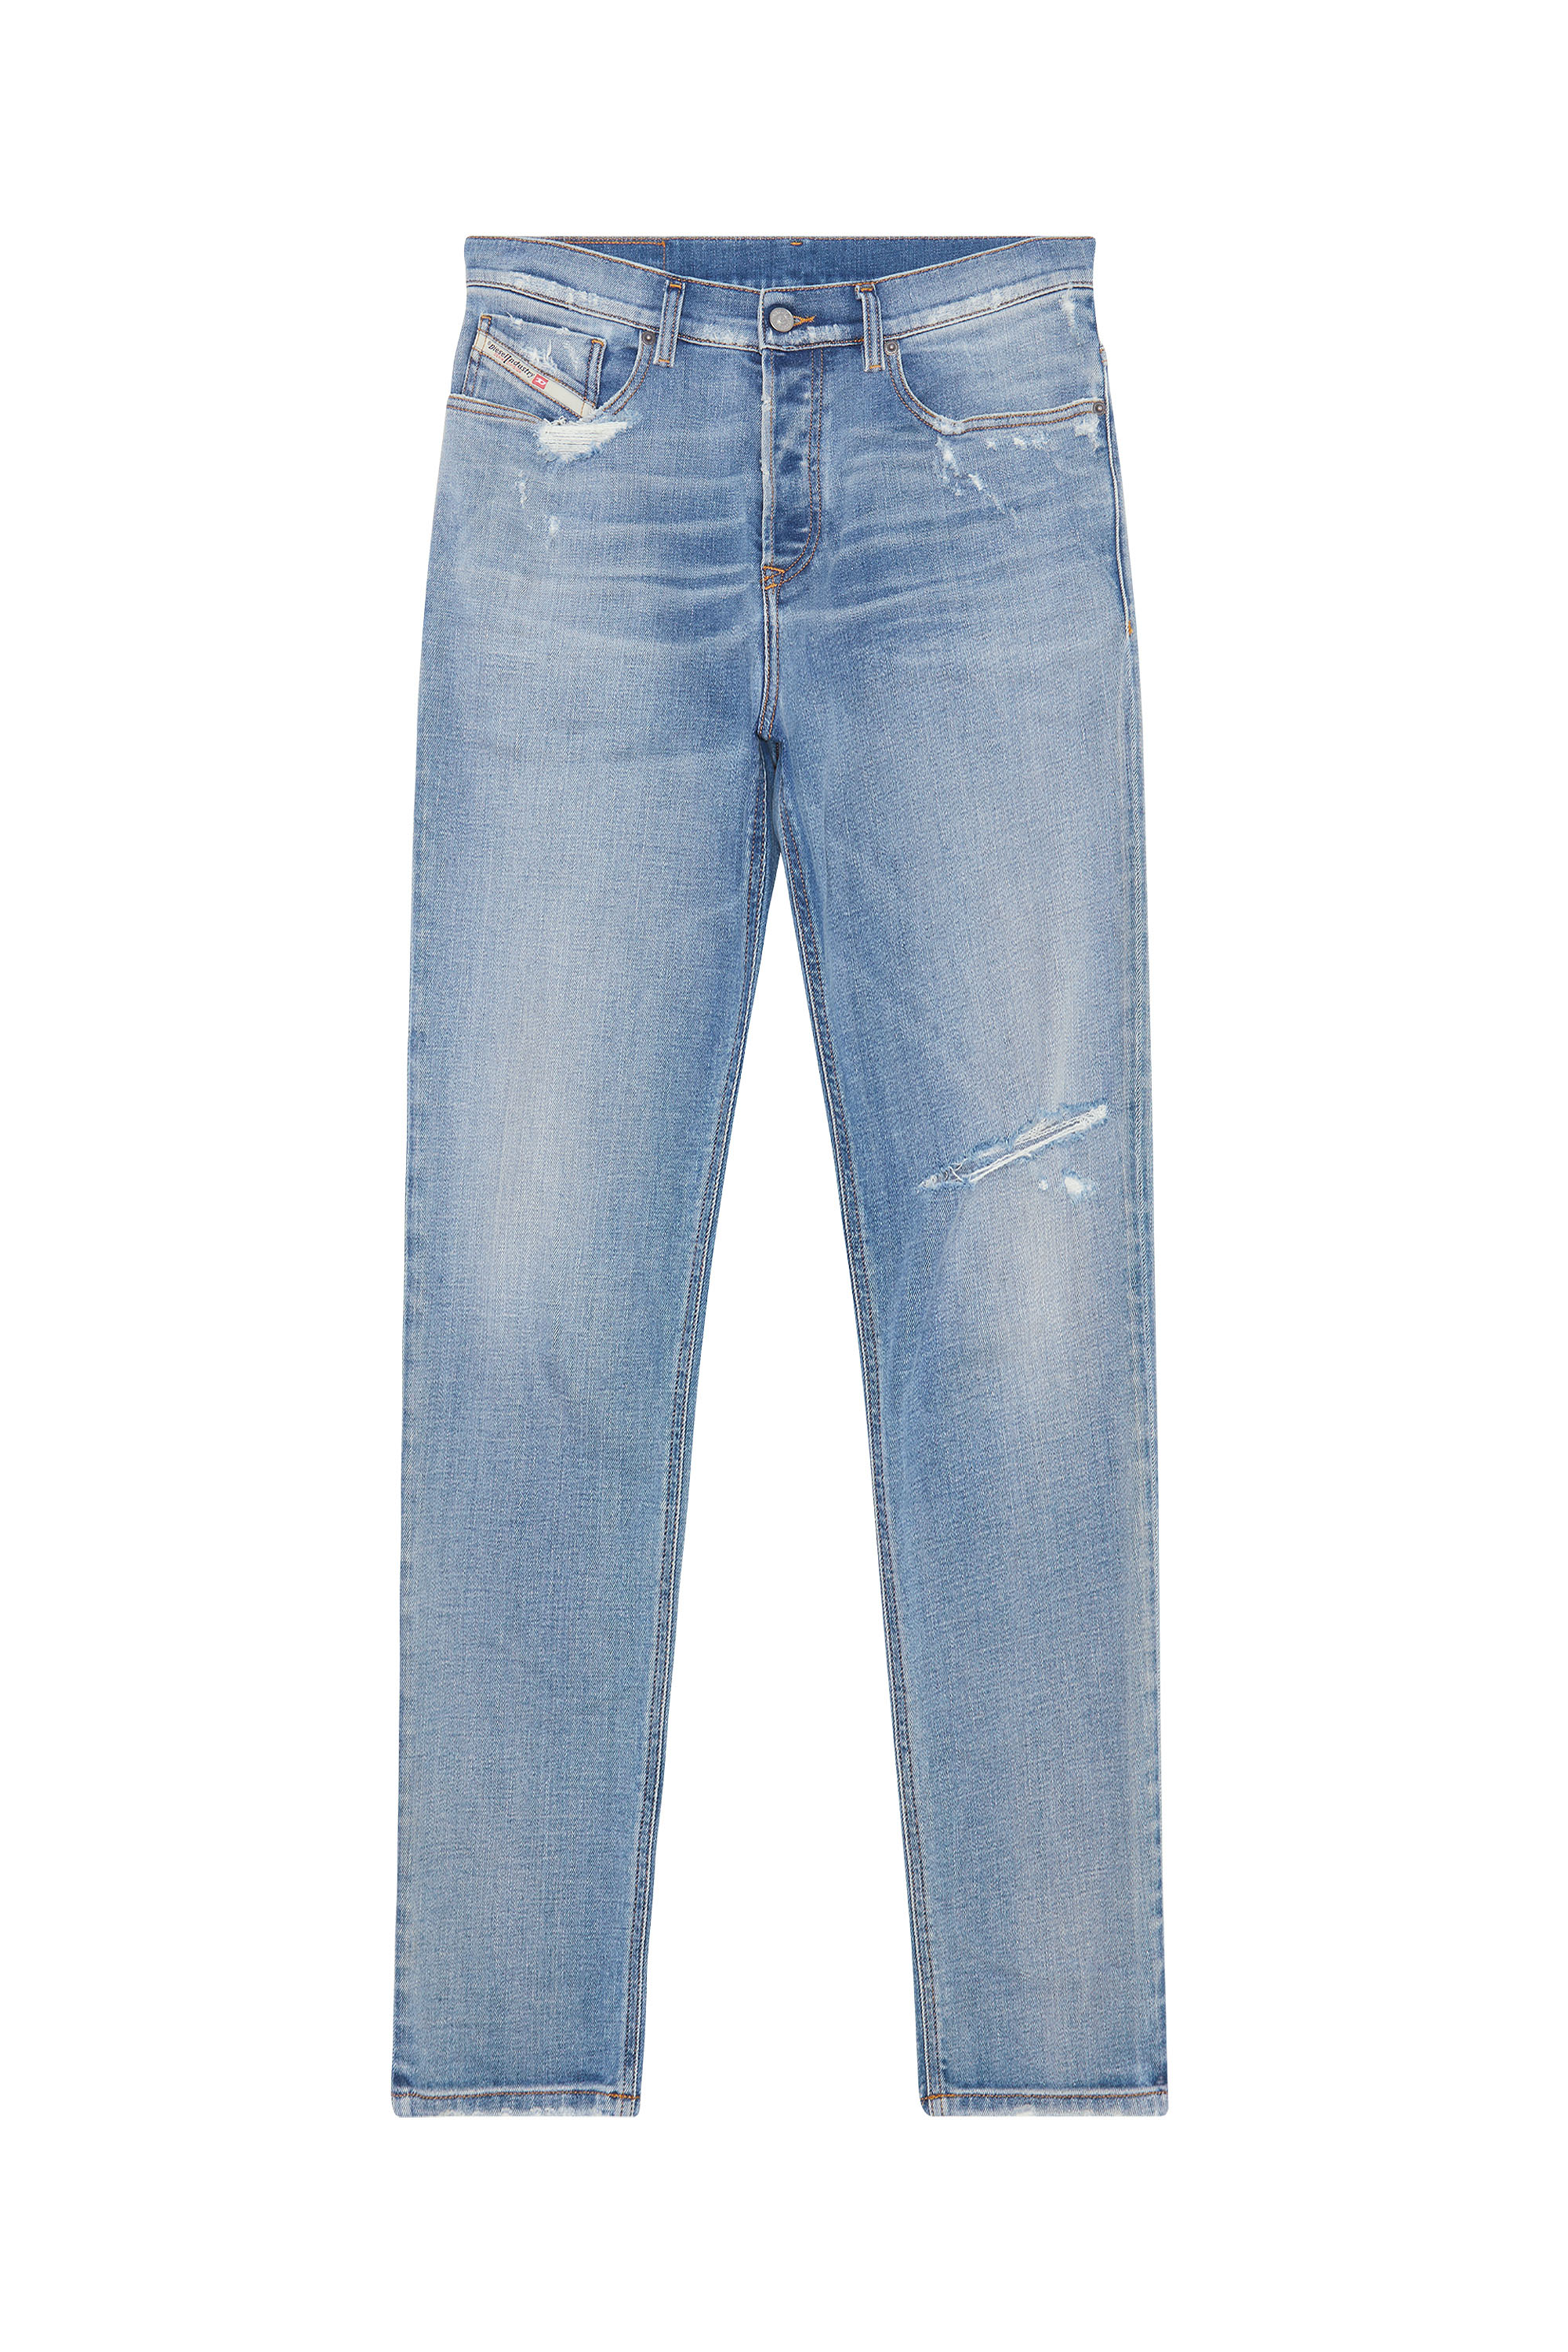 2005 D-FINING 09E17 Tapered Jeans, Blu Chiaro - Jeans